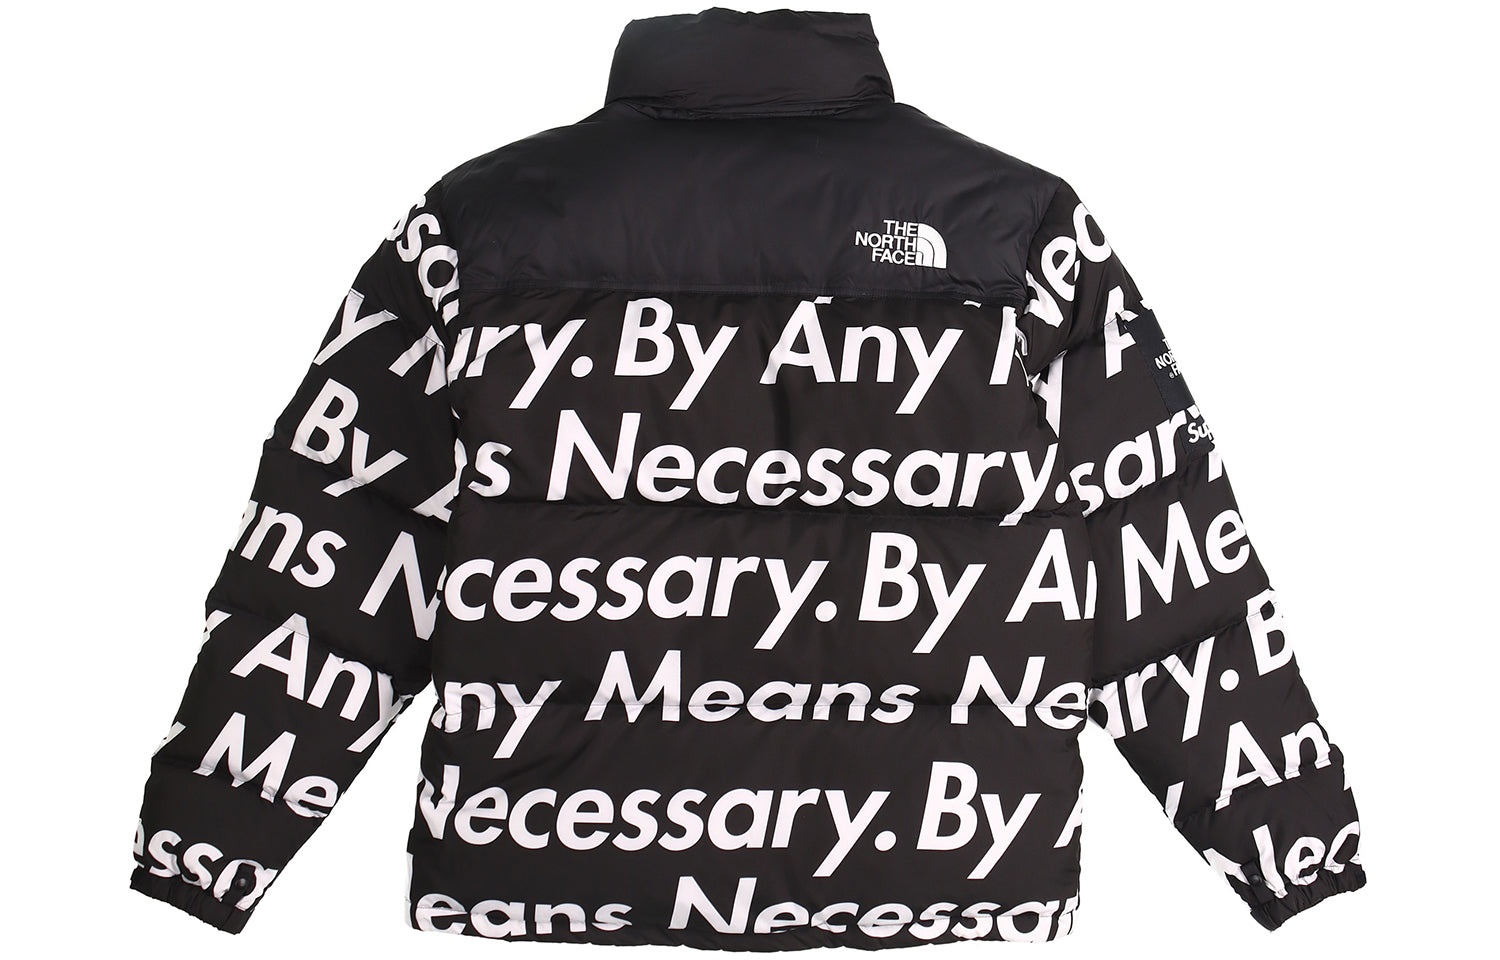 Supreme FW15 X The North Face By Any Means Nuptse Jacket 'Black' SUP-FW15-620 - 2